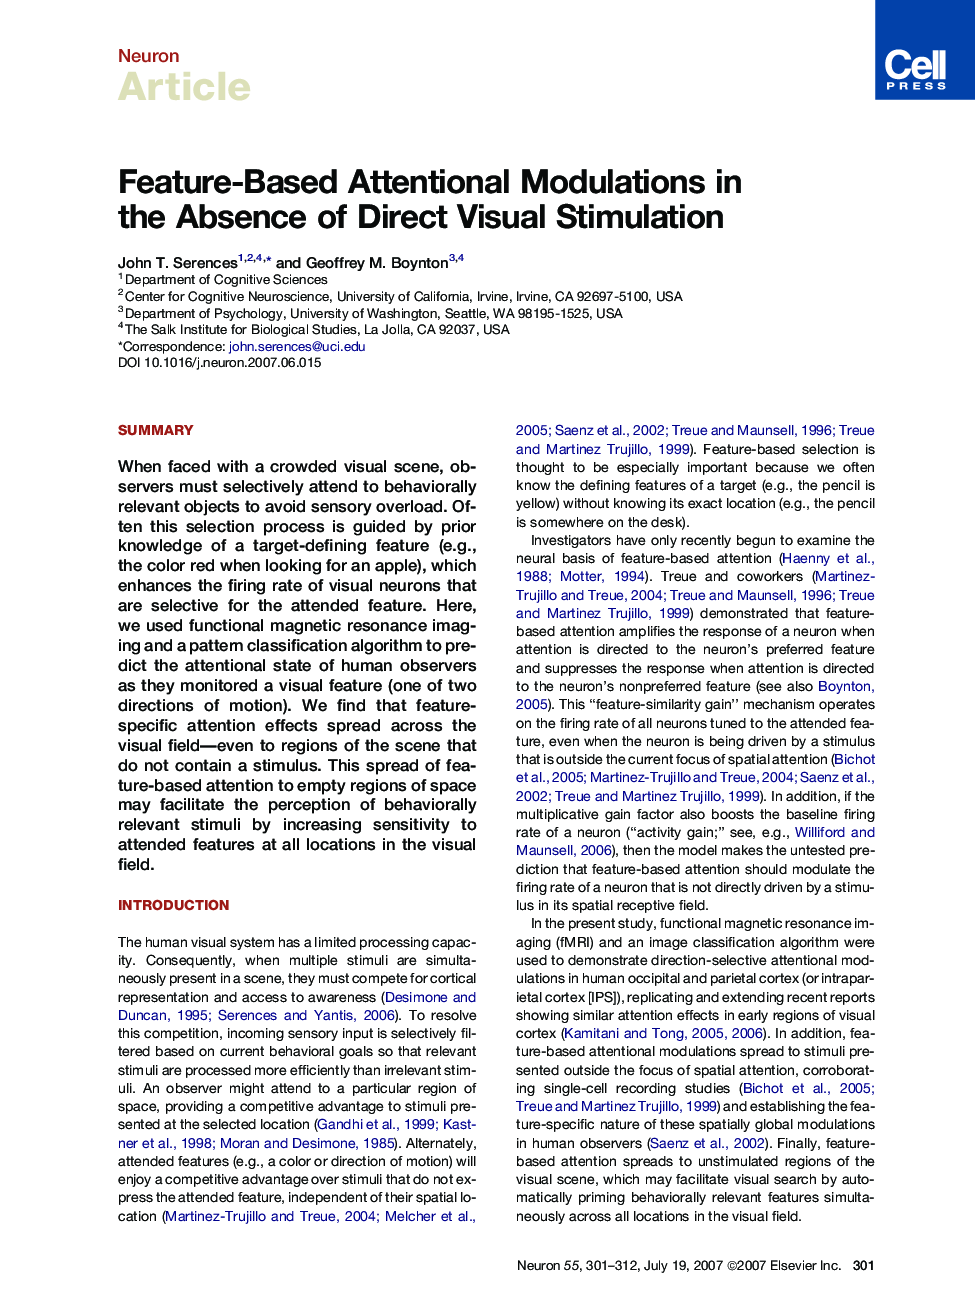 Feature-Based Attentional Modulations in the Absence of Direct Visual Stimulation